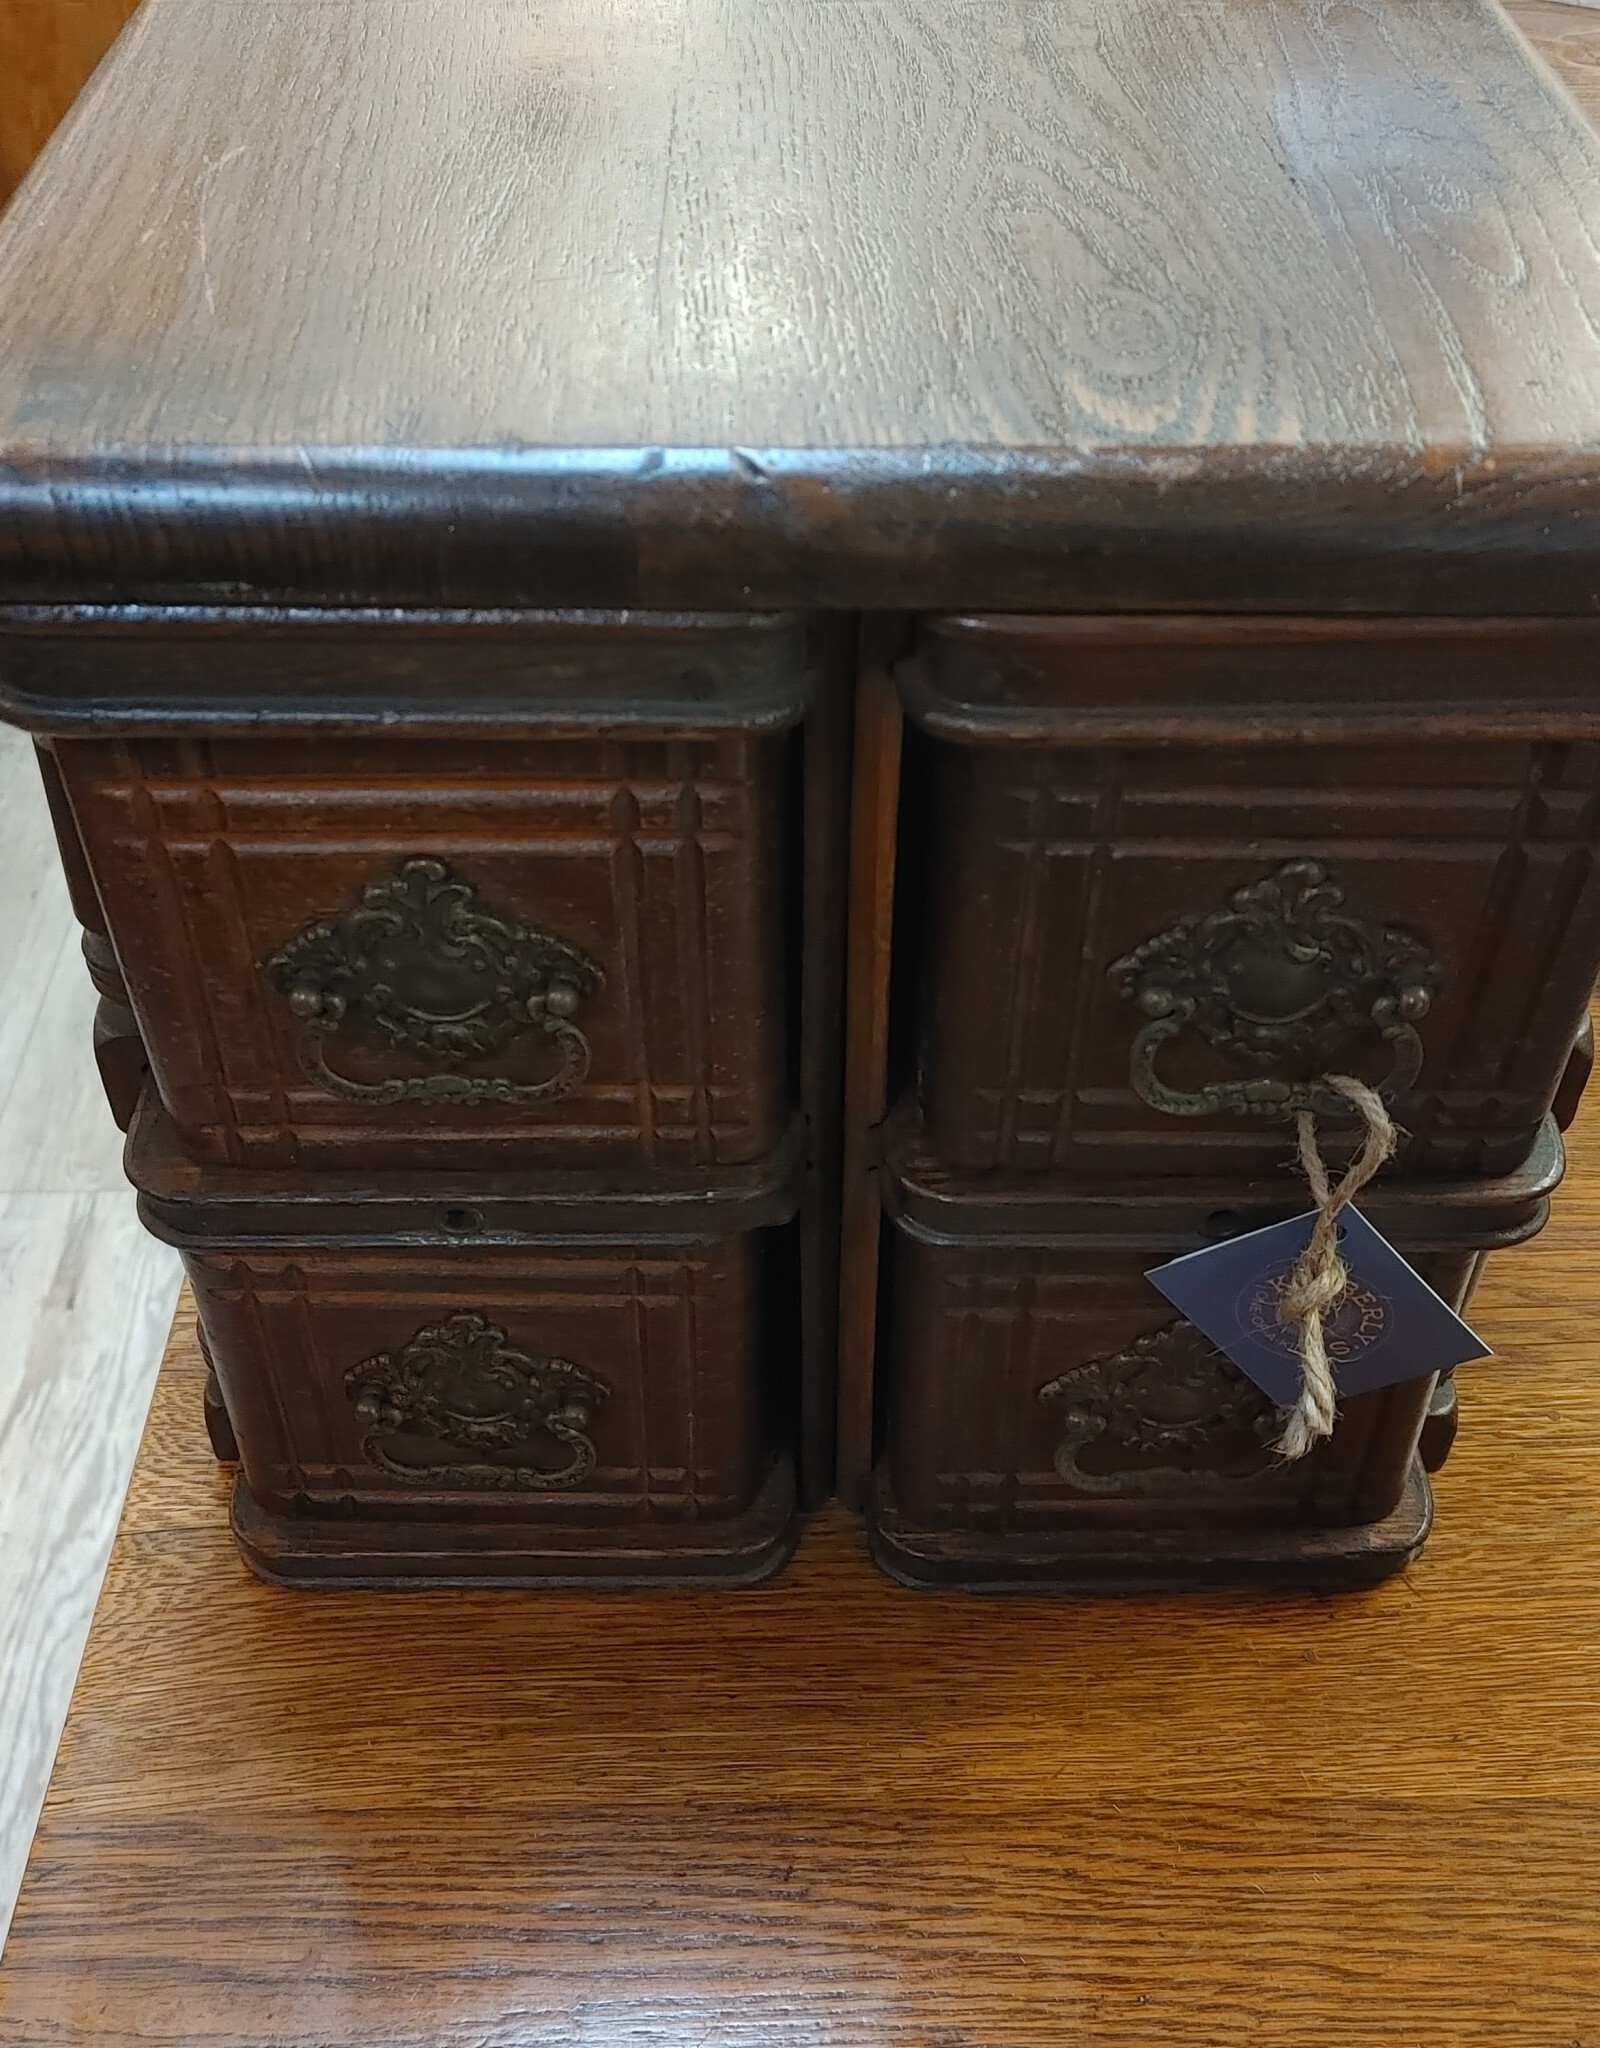 Antique Sewing Drawers -set of 4